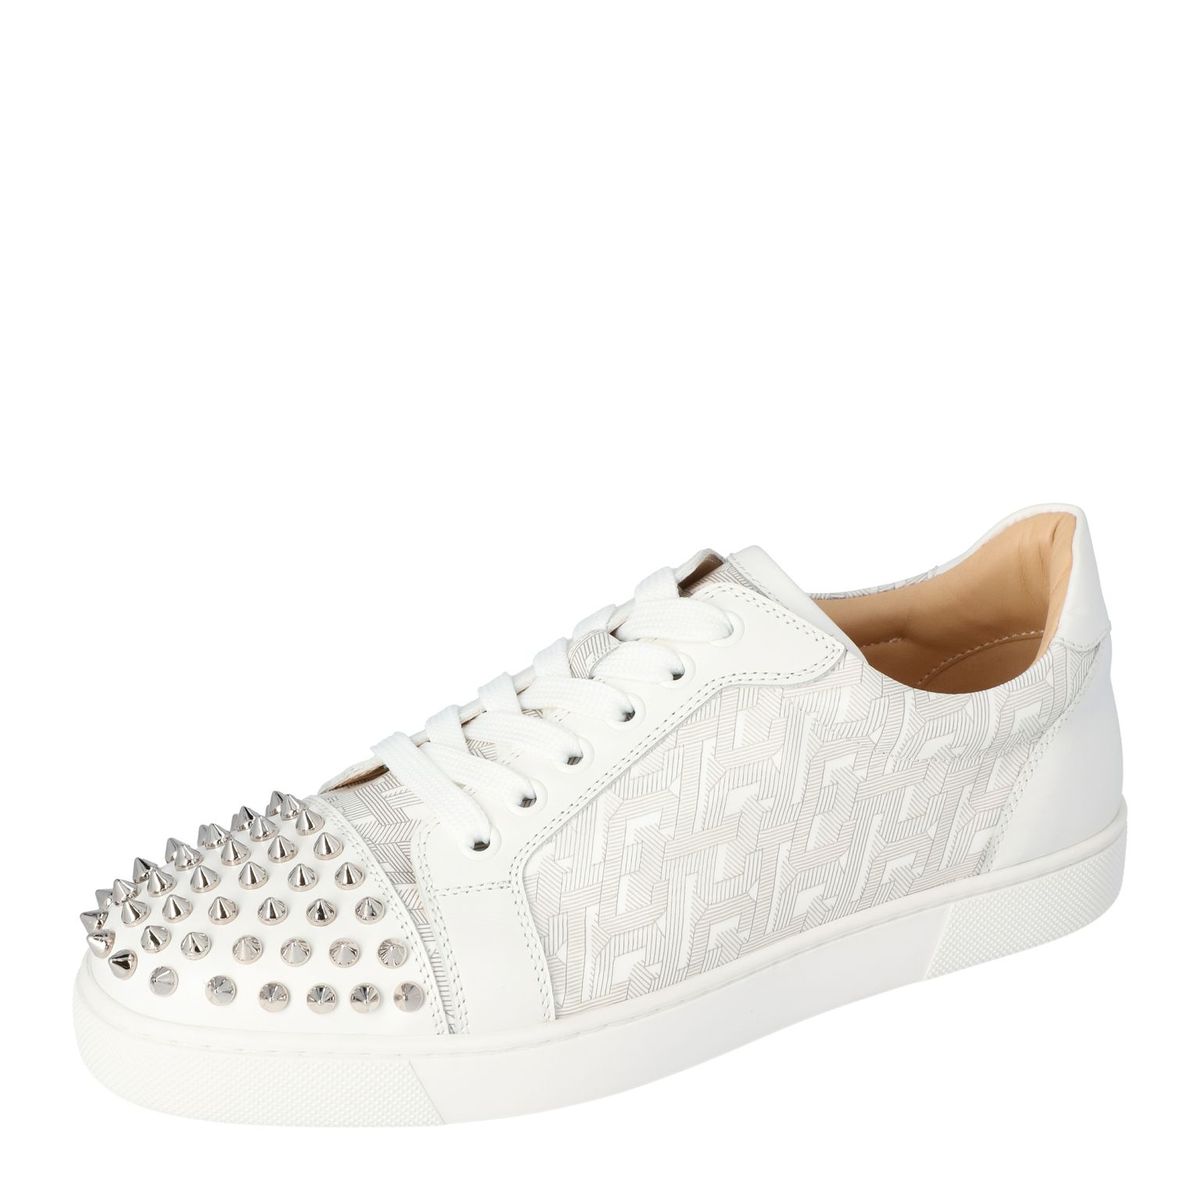 Louis Junior Spikes Sneakers Calf Leather White Christian, 60% OFF